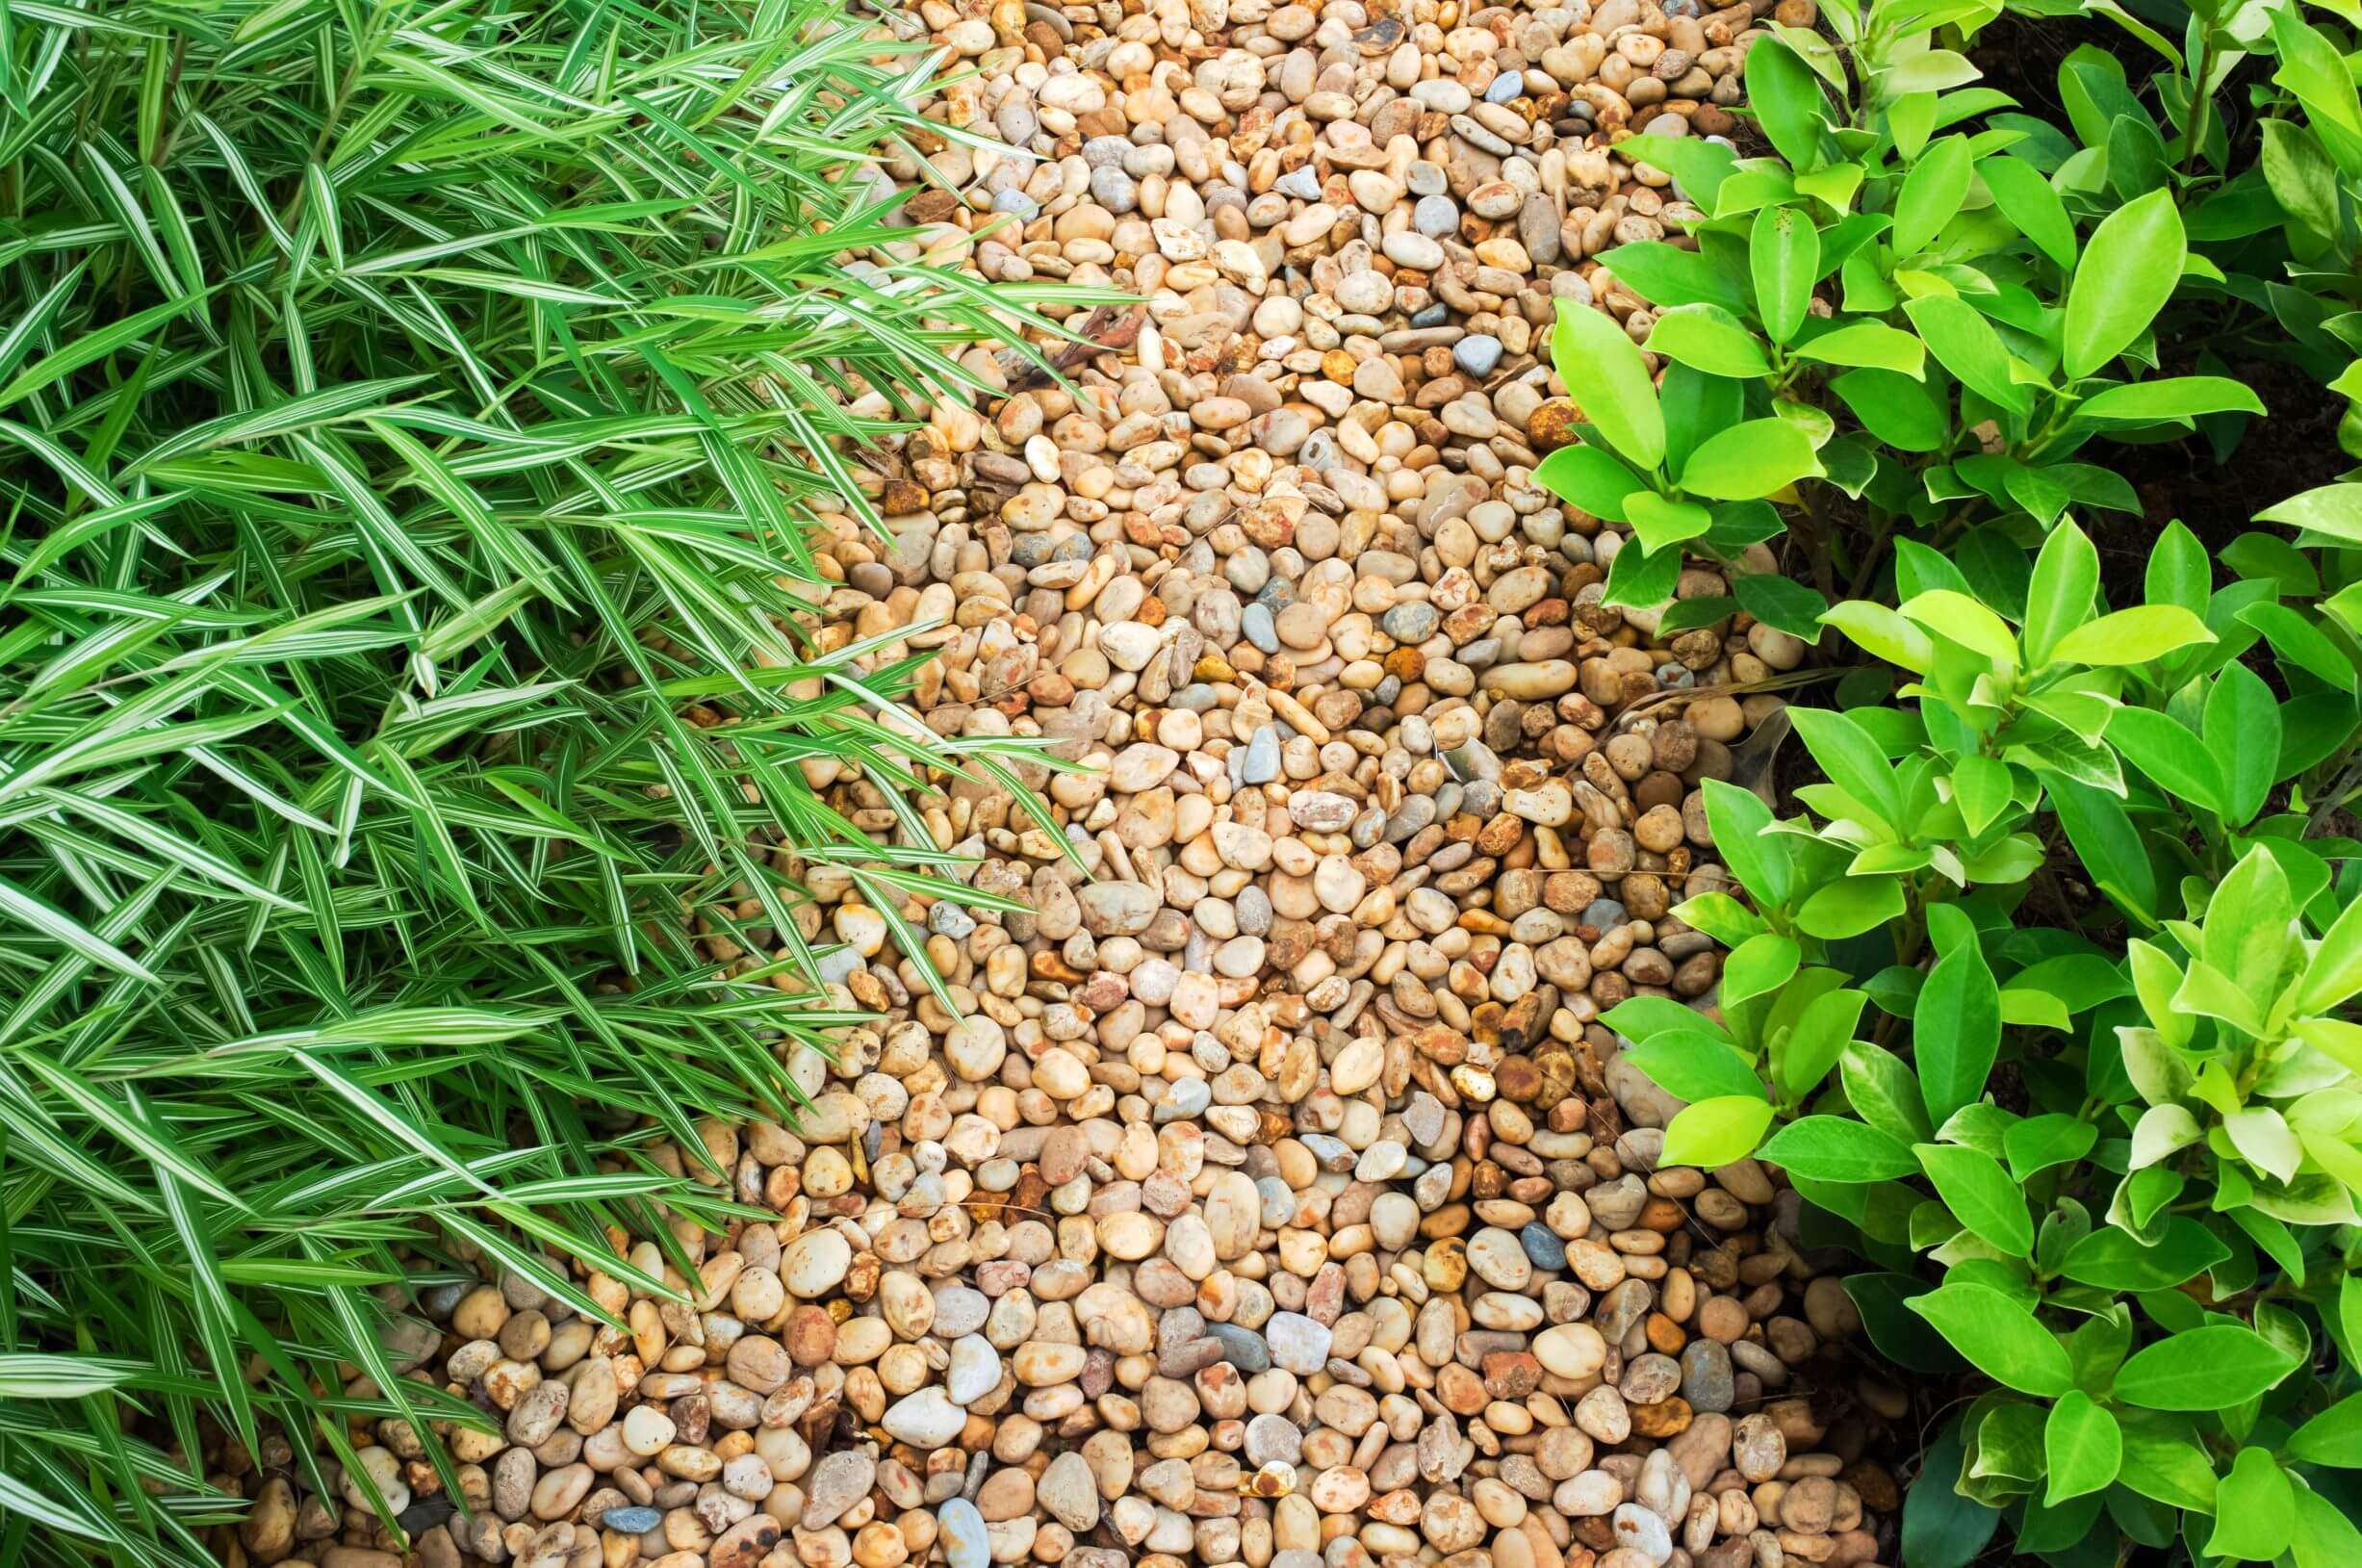 How-to-clean-landscaping-stone-or-pebbles-tinyjpg